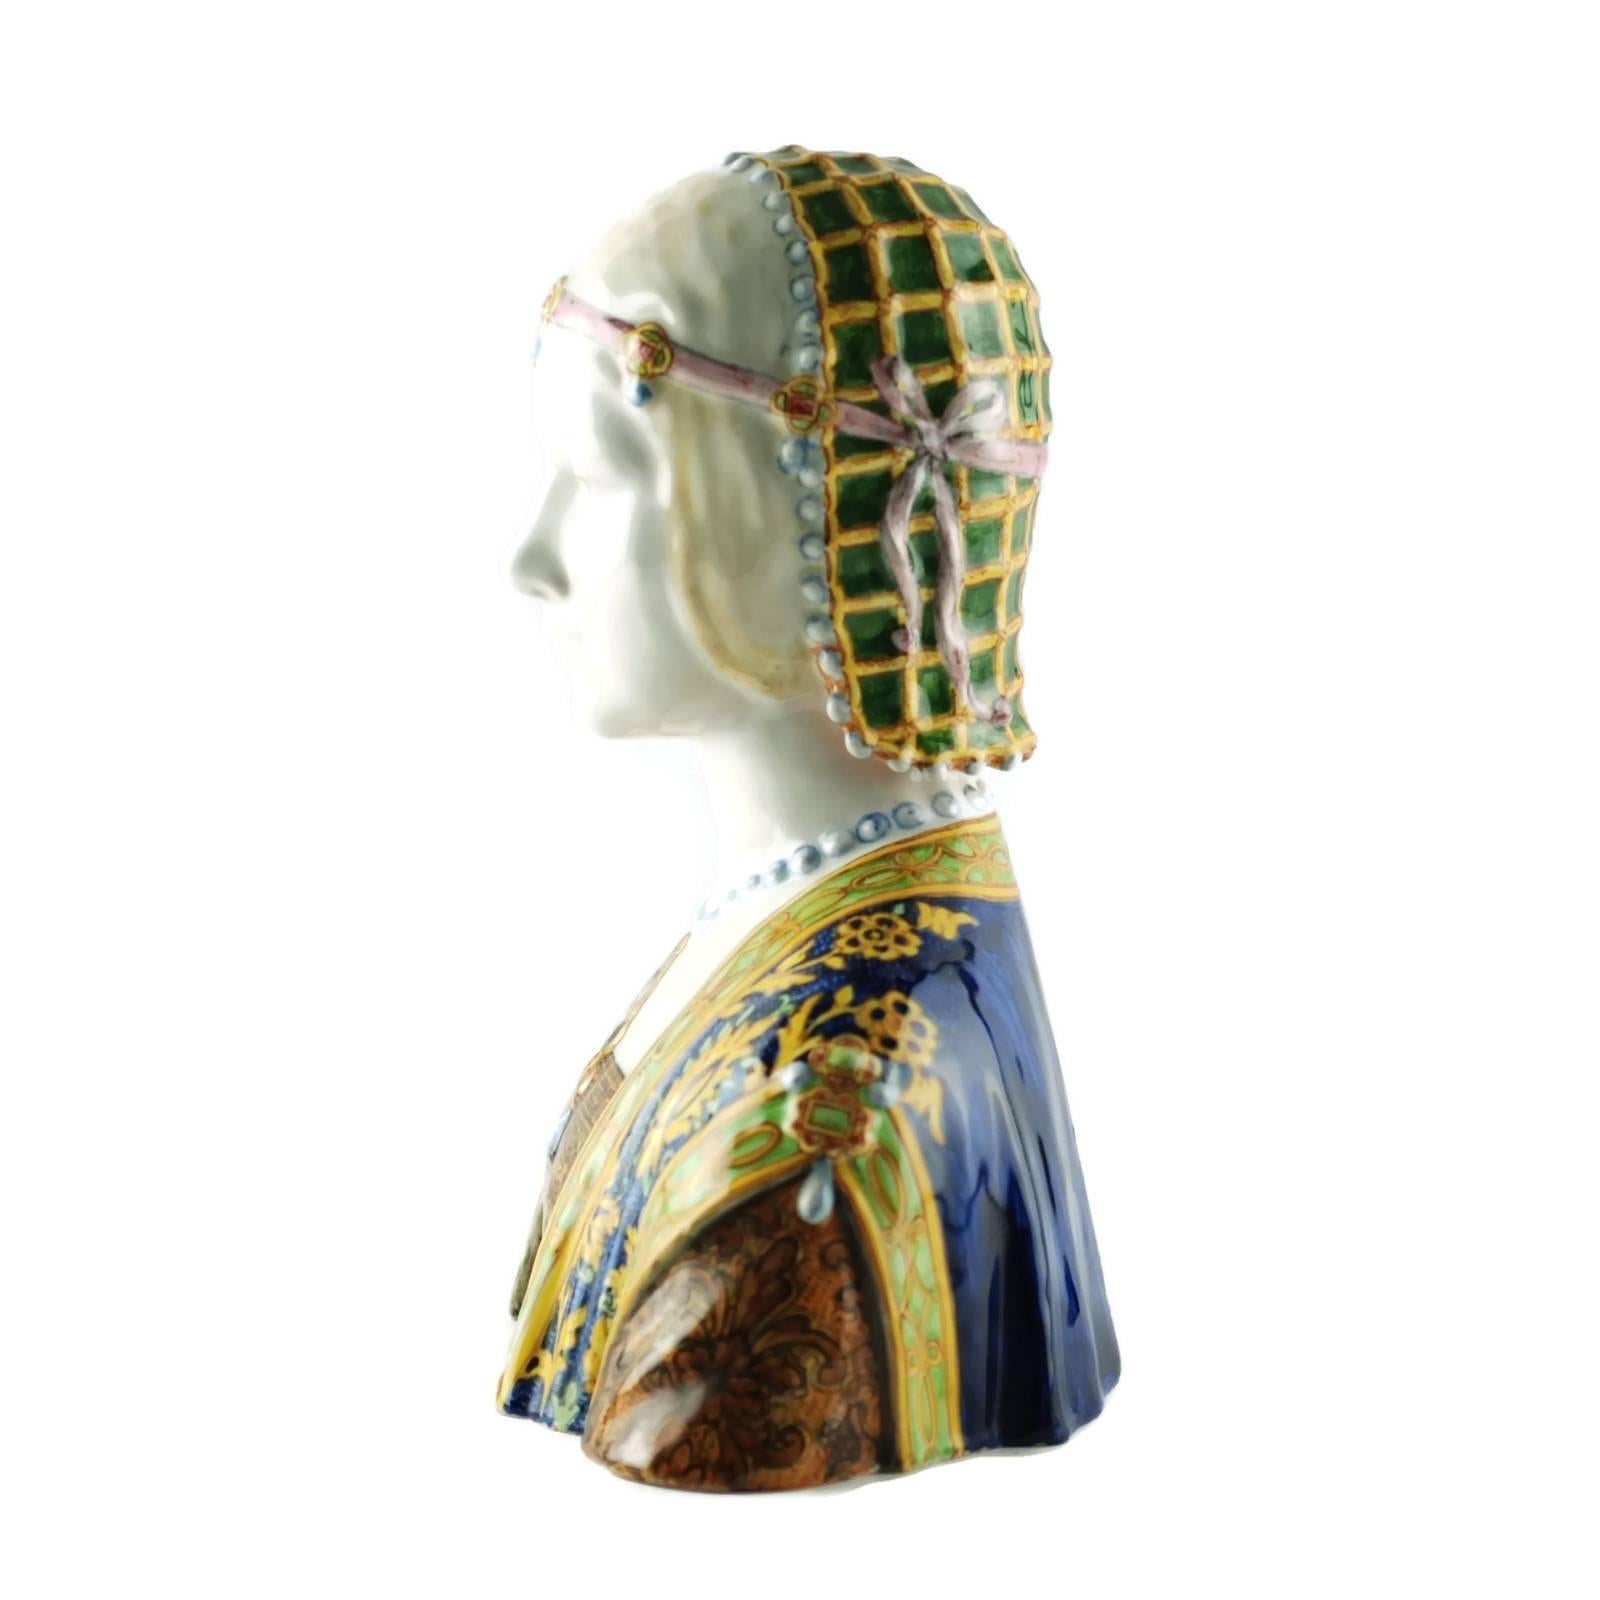 This hand-painted Majolica bust was made by the renowned Italian ceramics manufactory, Angelo Minghetti & Figli. Founder Angelo Minghetti (1822-1885) is particularly well-known for his Majolica busts, Madonna figures and Della Robbia style